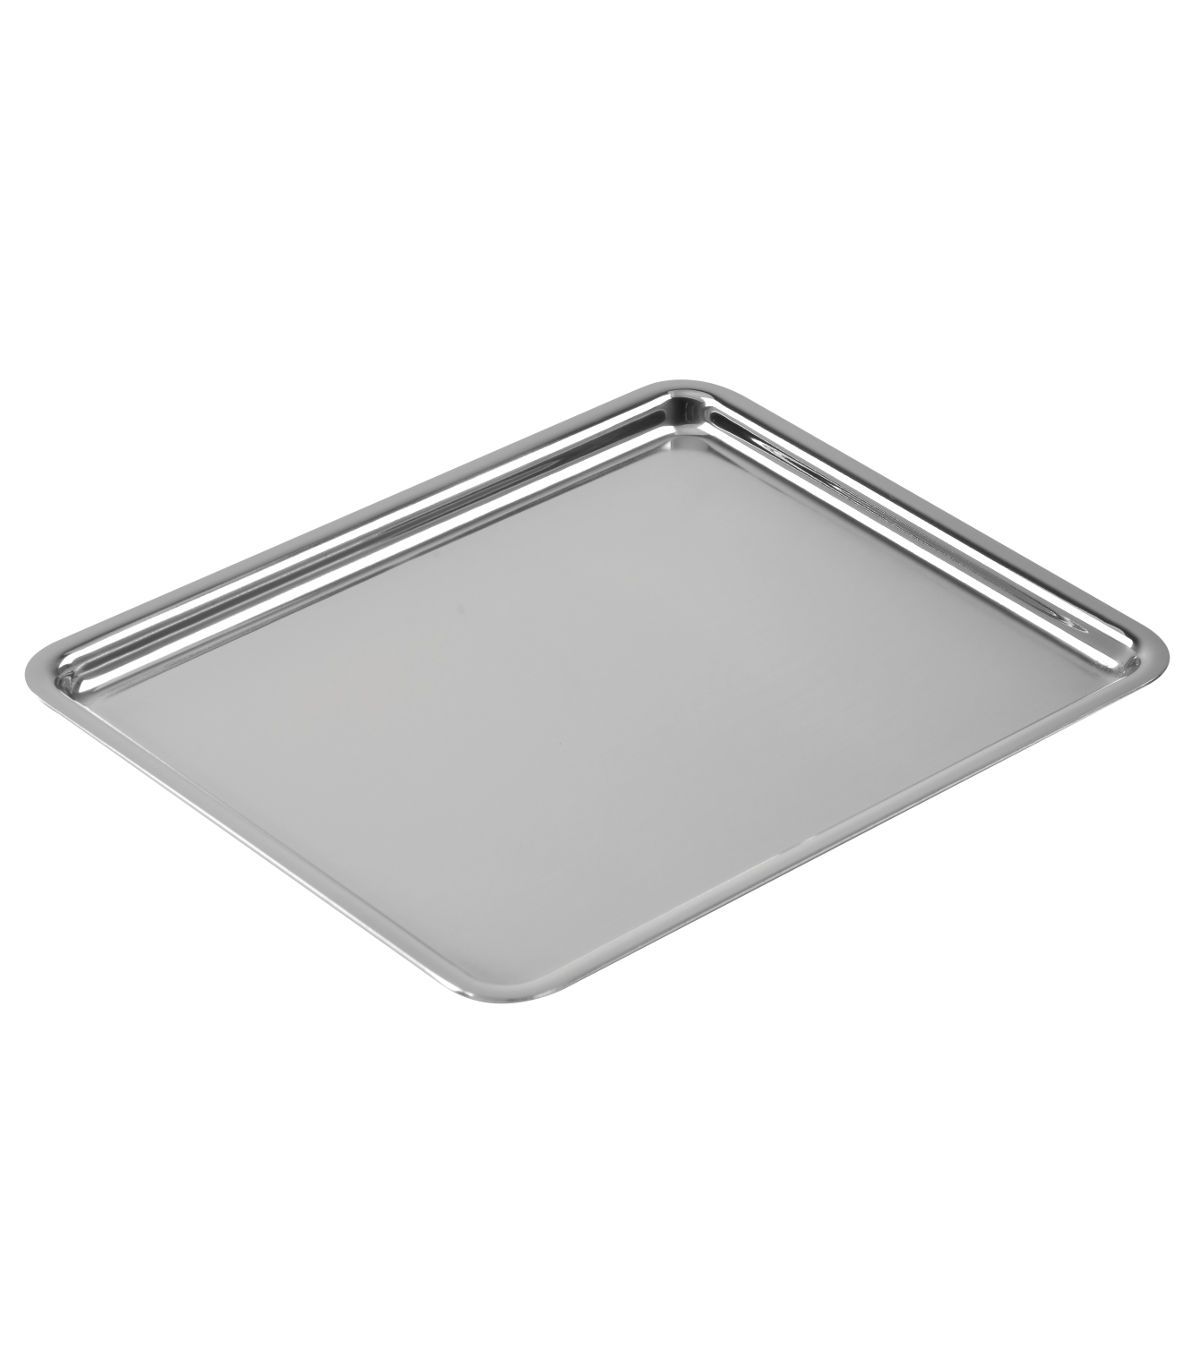 Stainless Steel Serving Platter Small 